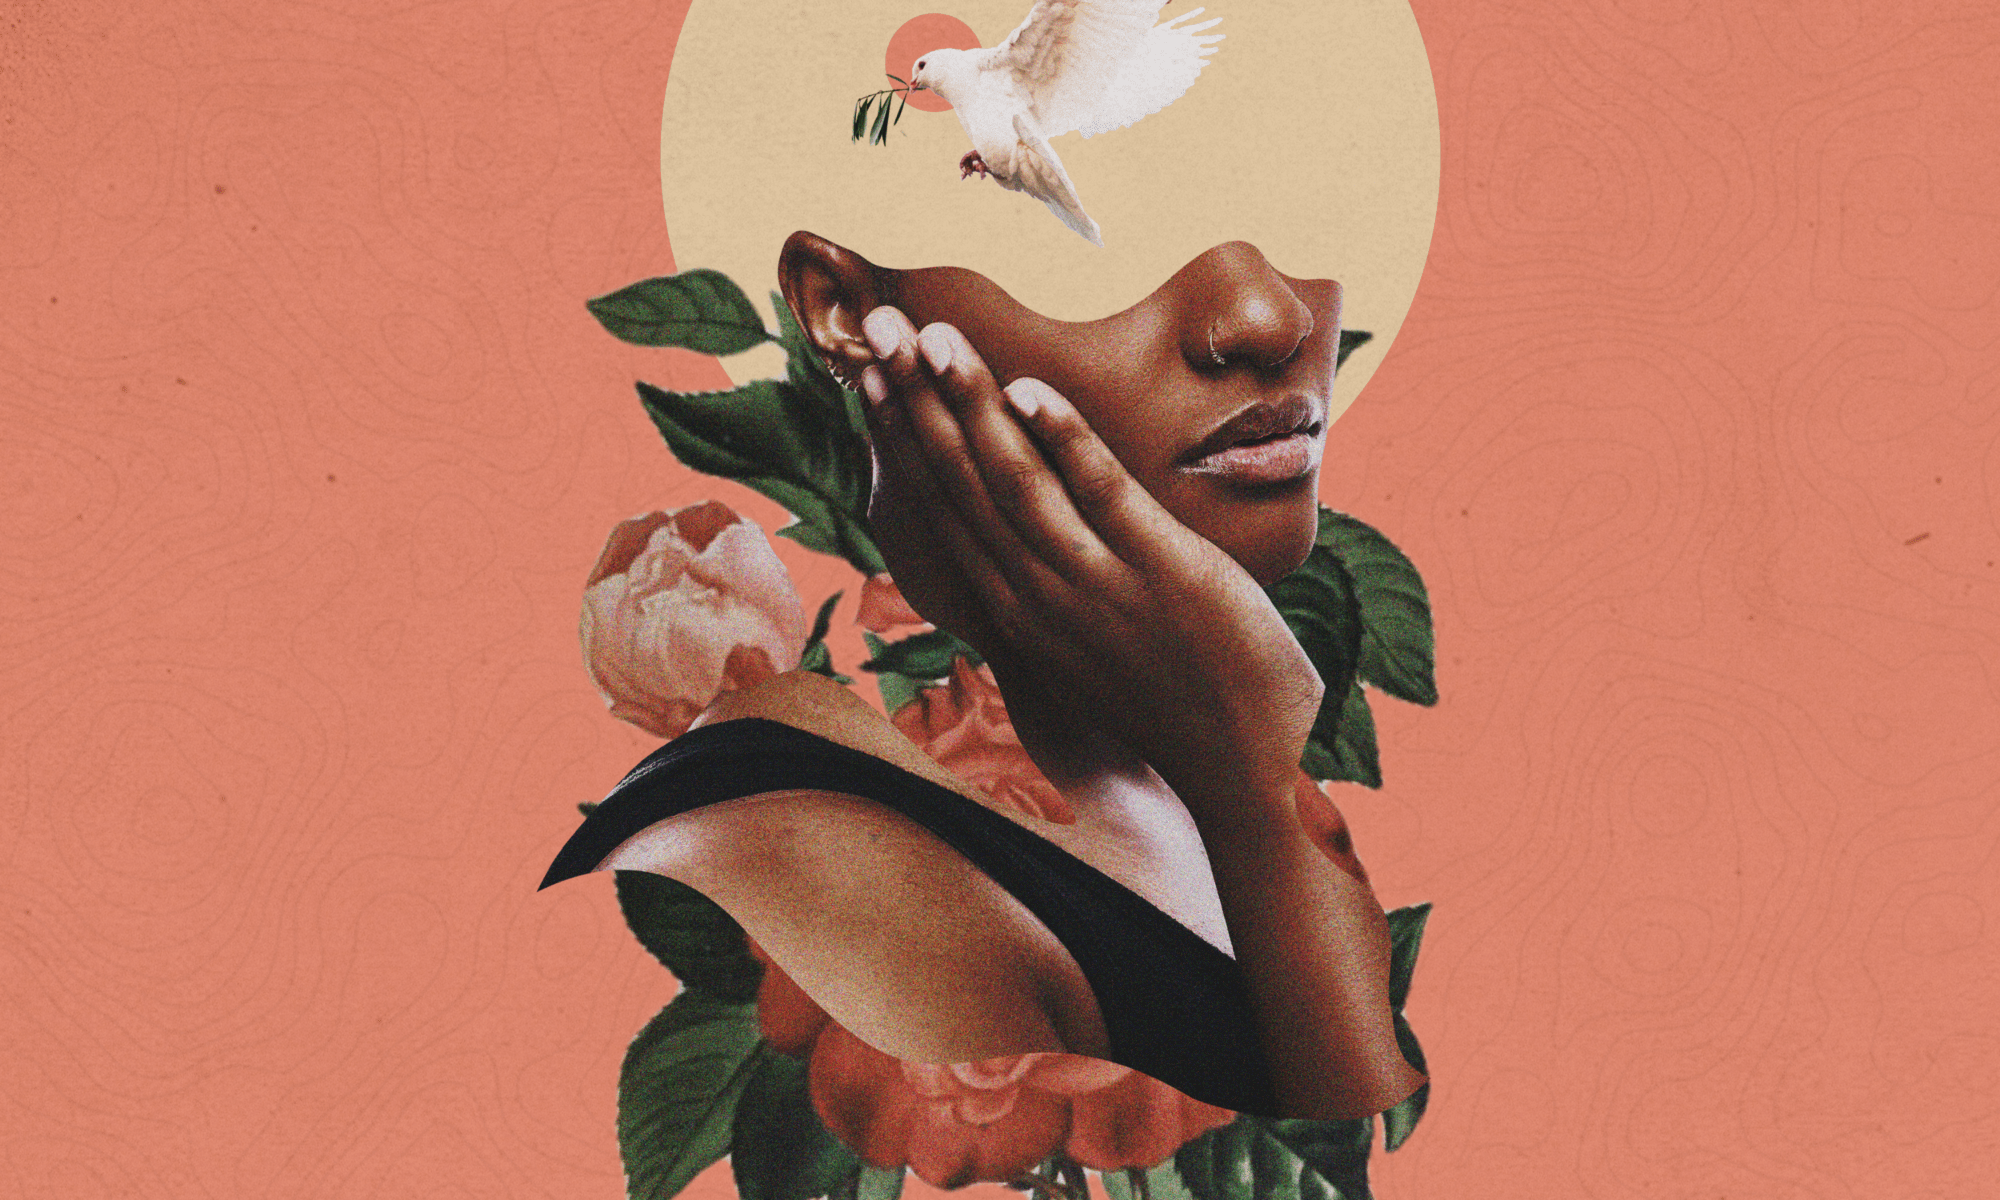 Reeny Smith Goodbye original version cover featuring an artistic image of Reeny with cutouts showing a dove, sun and plant life on a peachy background